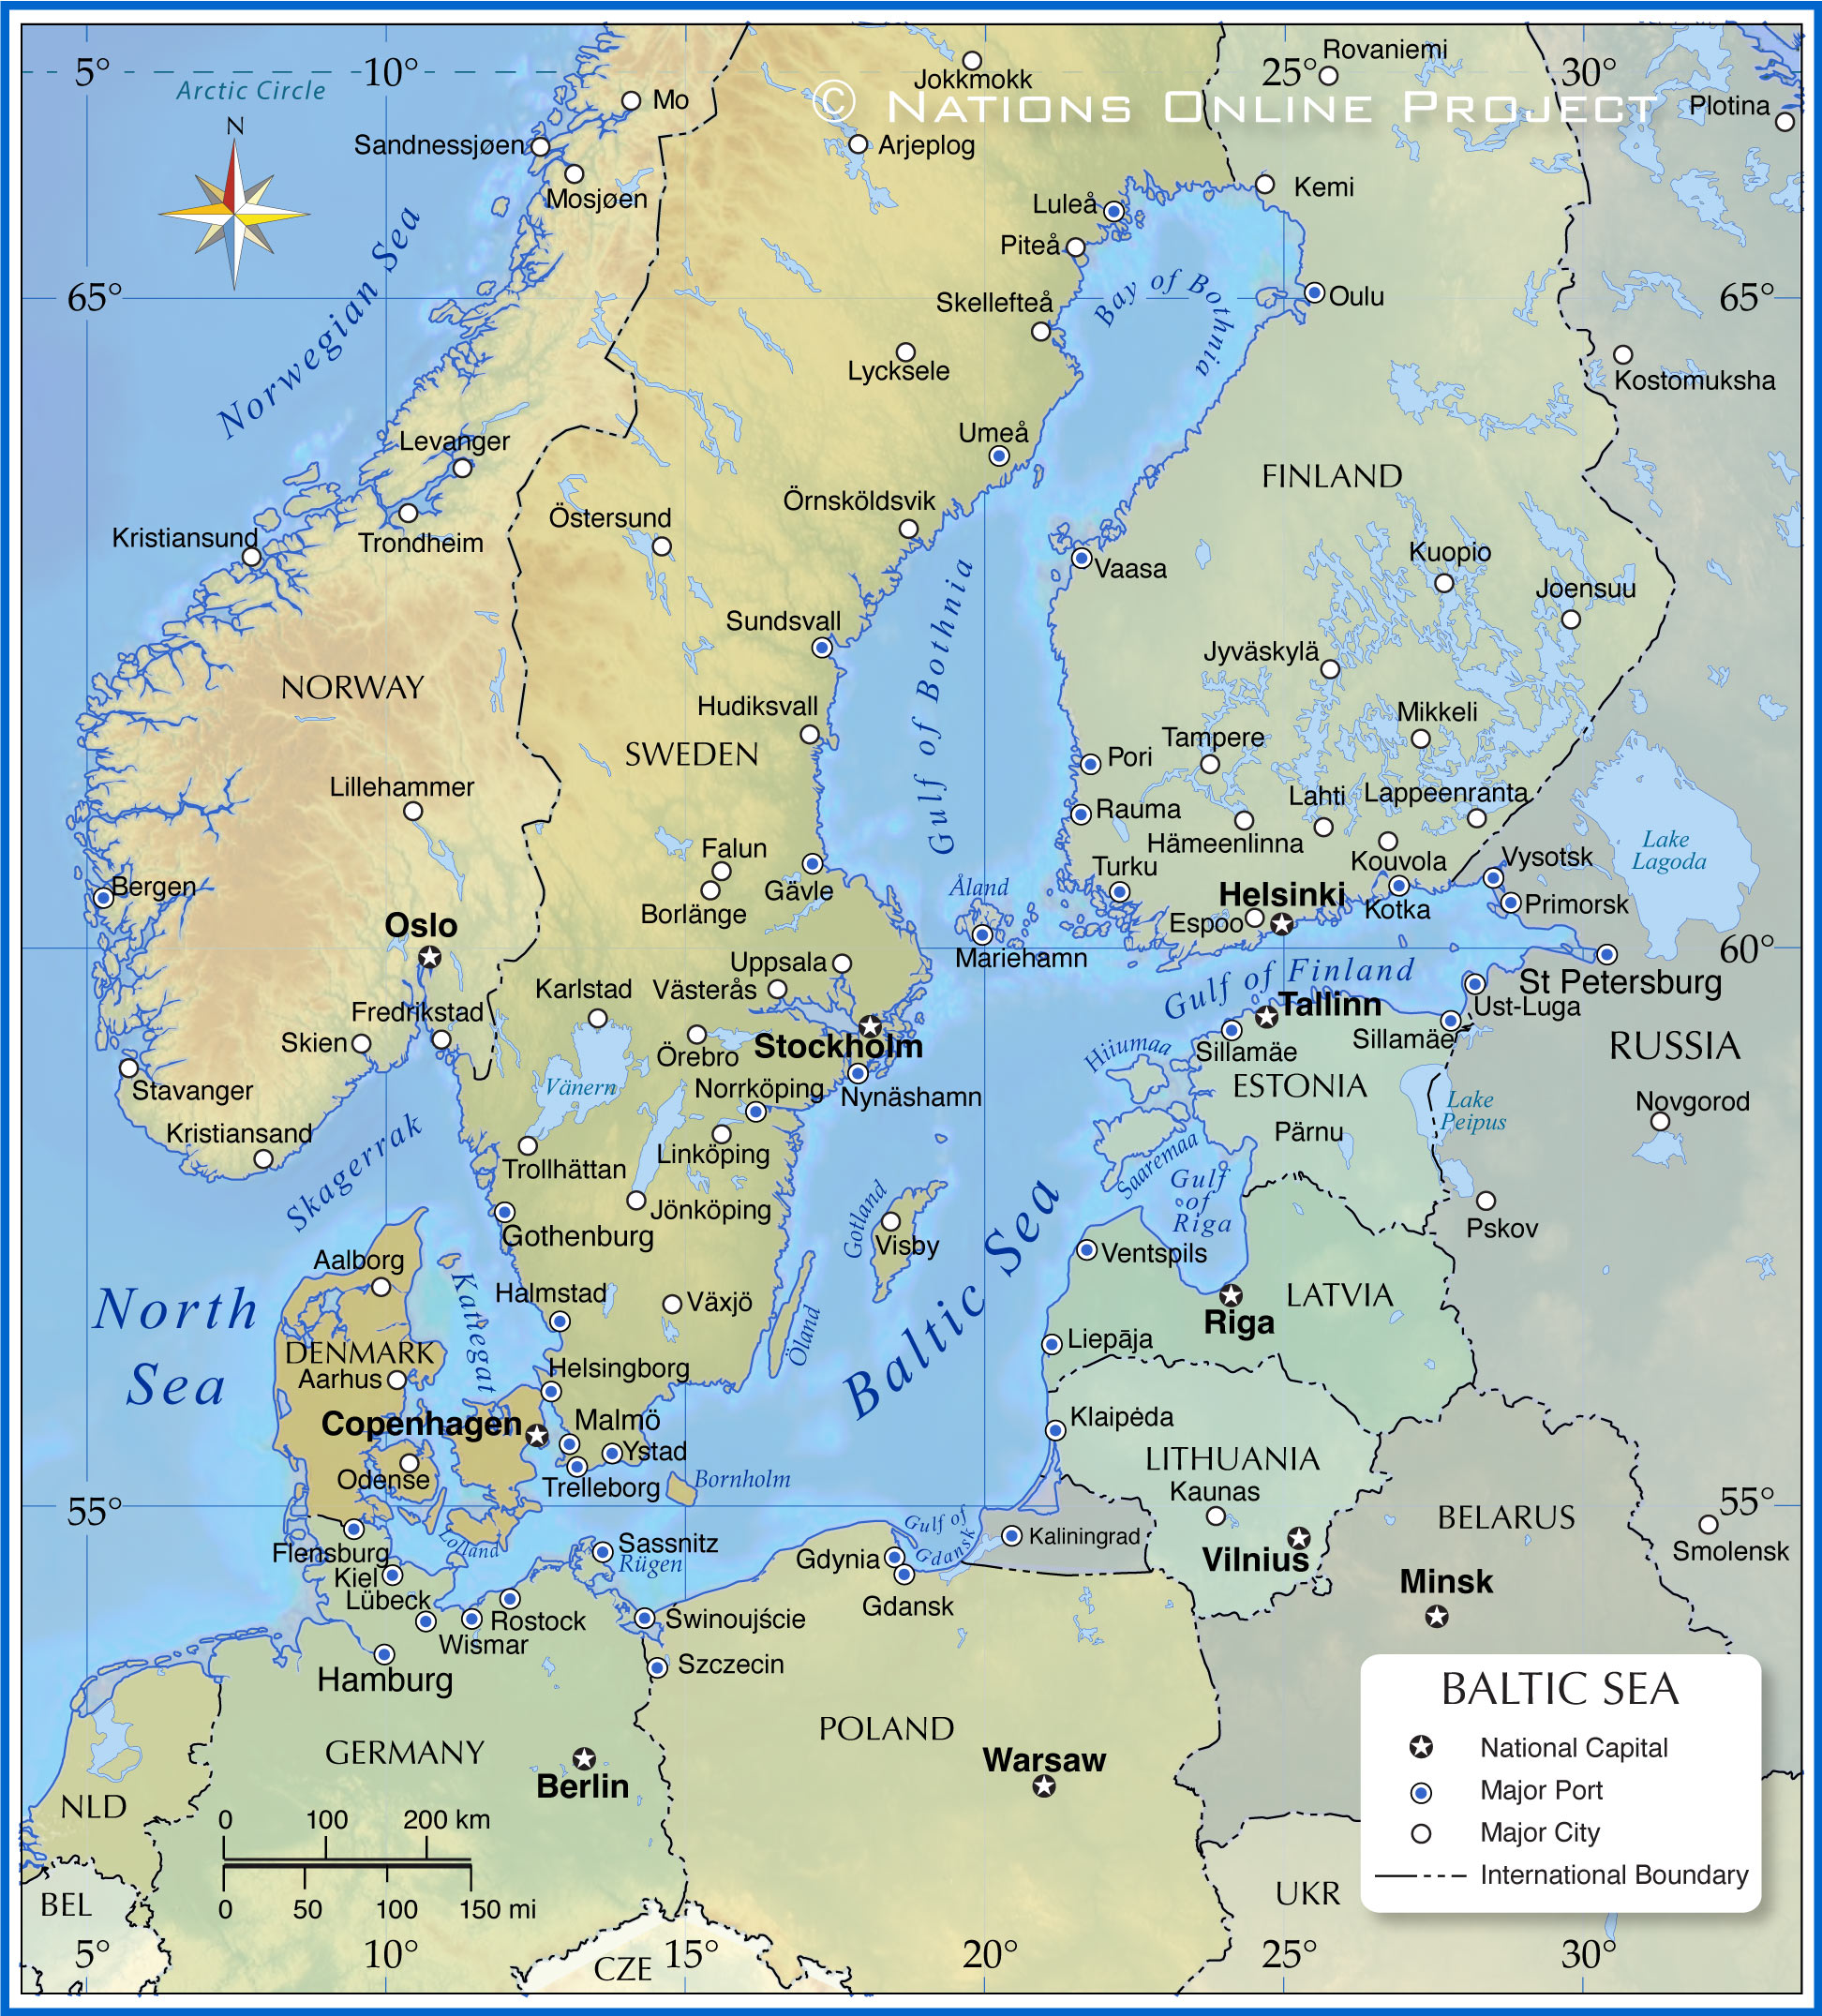 map-of-the-baltic-sea-region-nations-online-project